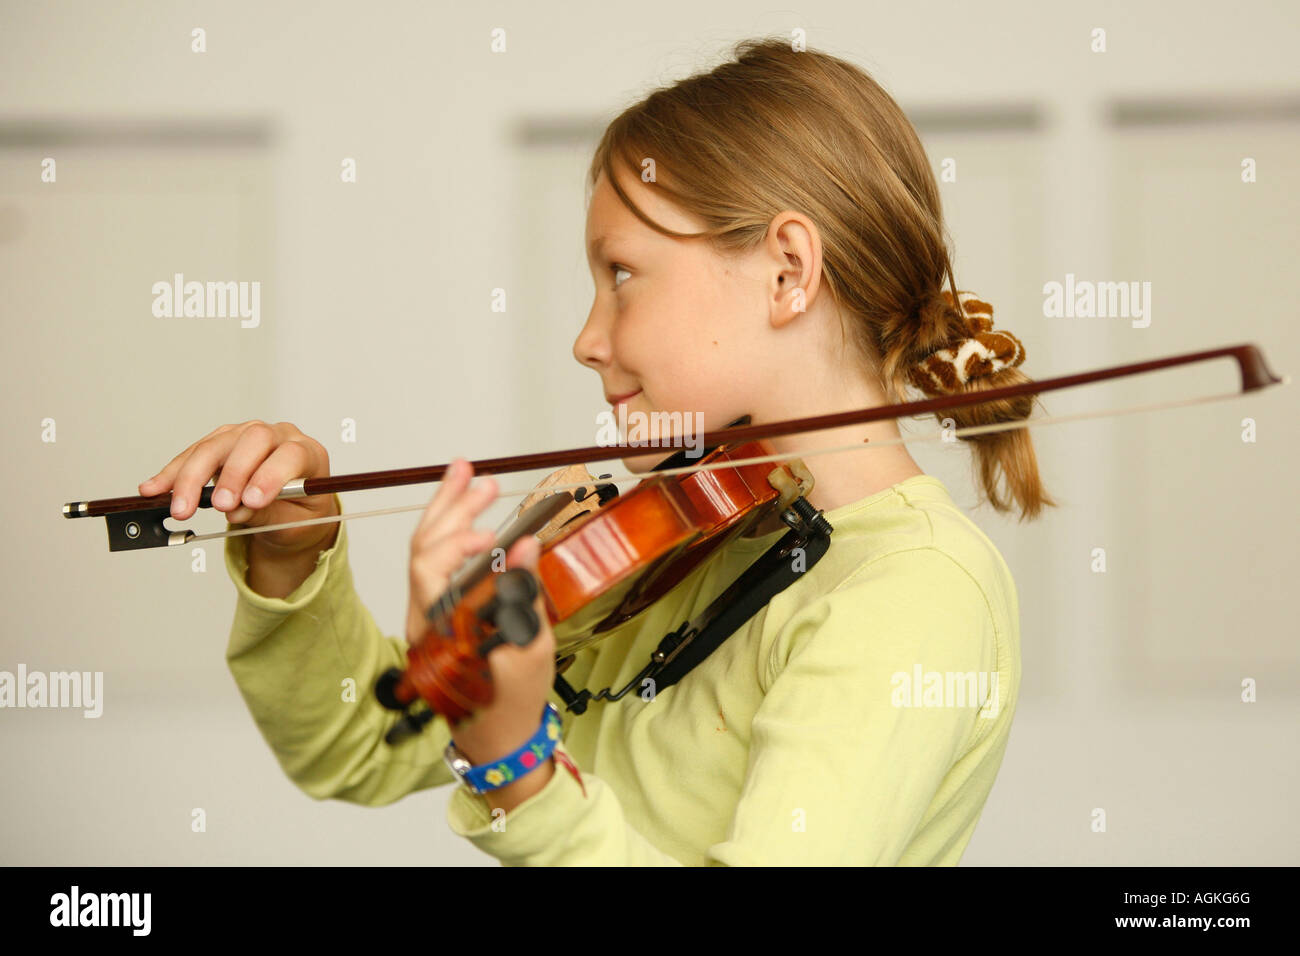 a young girl playing the violin Stock Photo